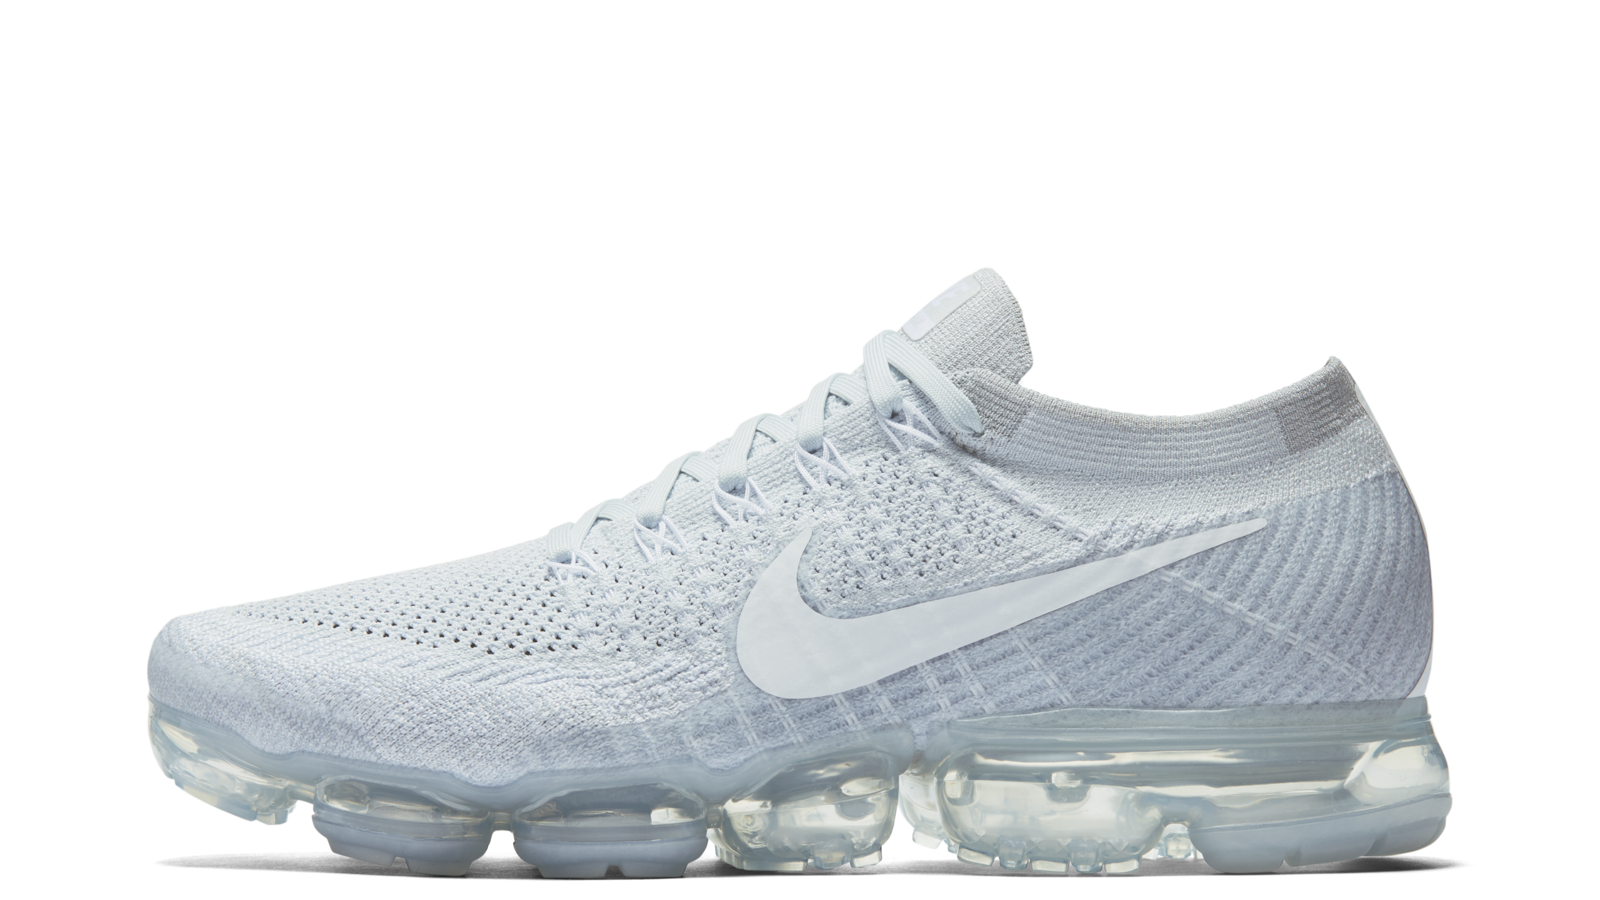 The Nike Air VaporMax Is Coming to Malaysia! - MASSES